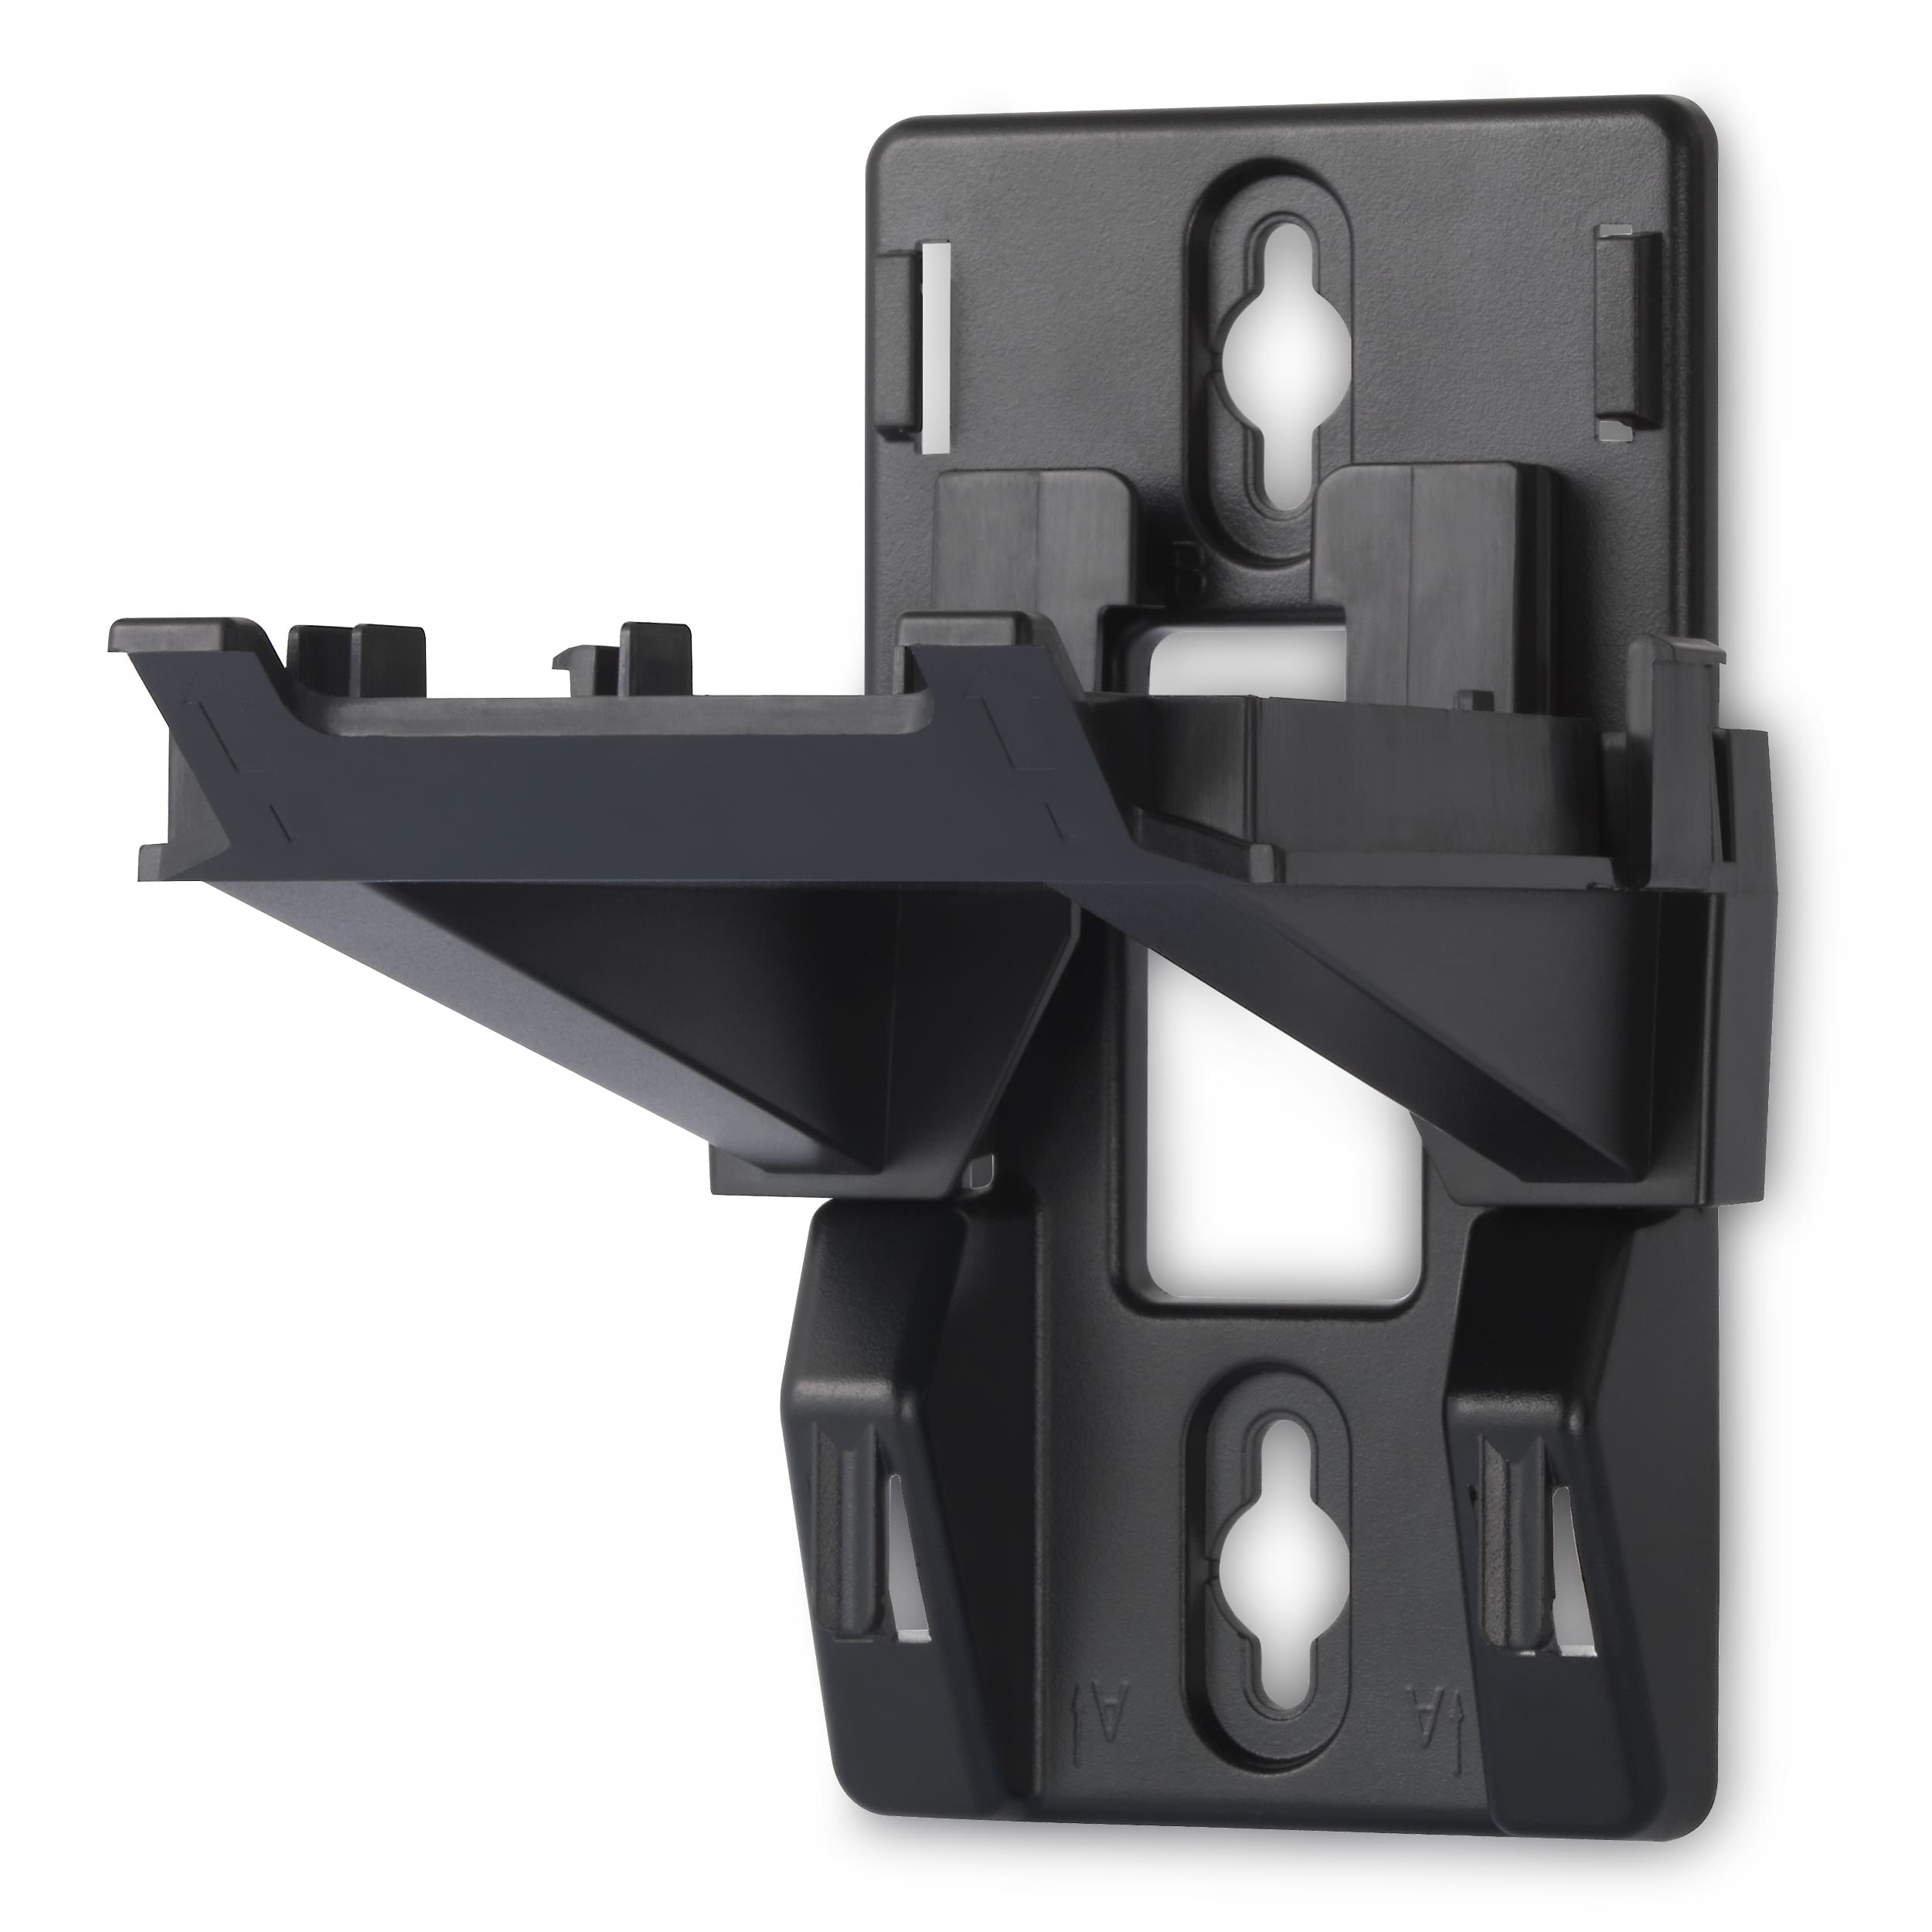 Wall mount for IS8251 series